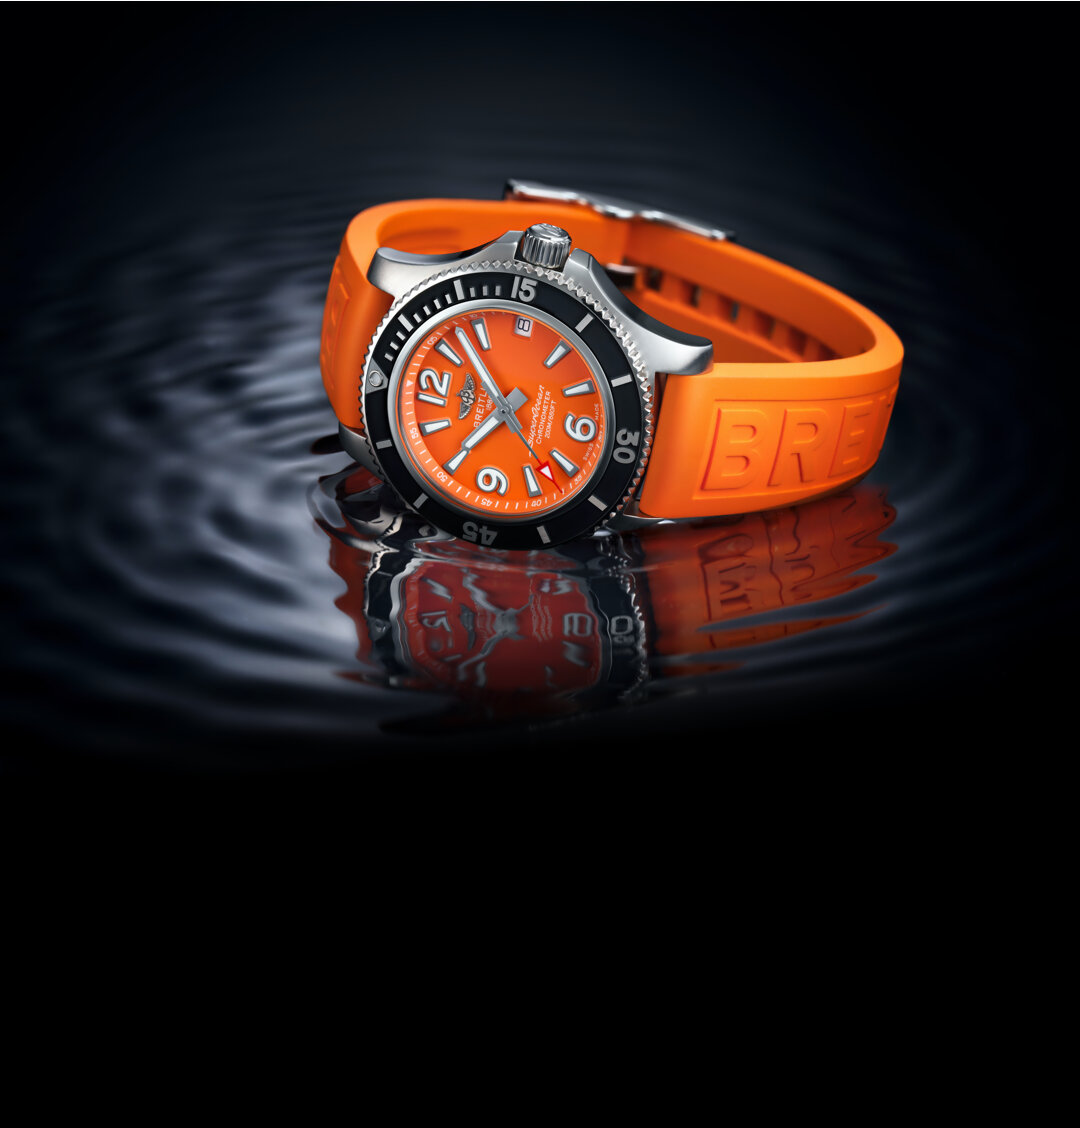 Breitling Swiss Luxury Watches Of Style Purpose Action